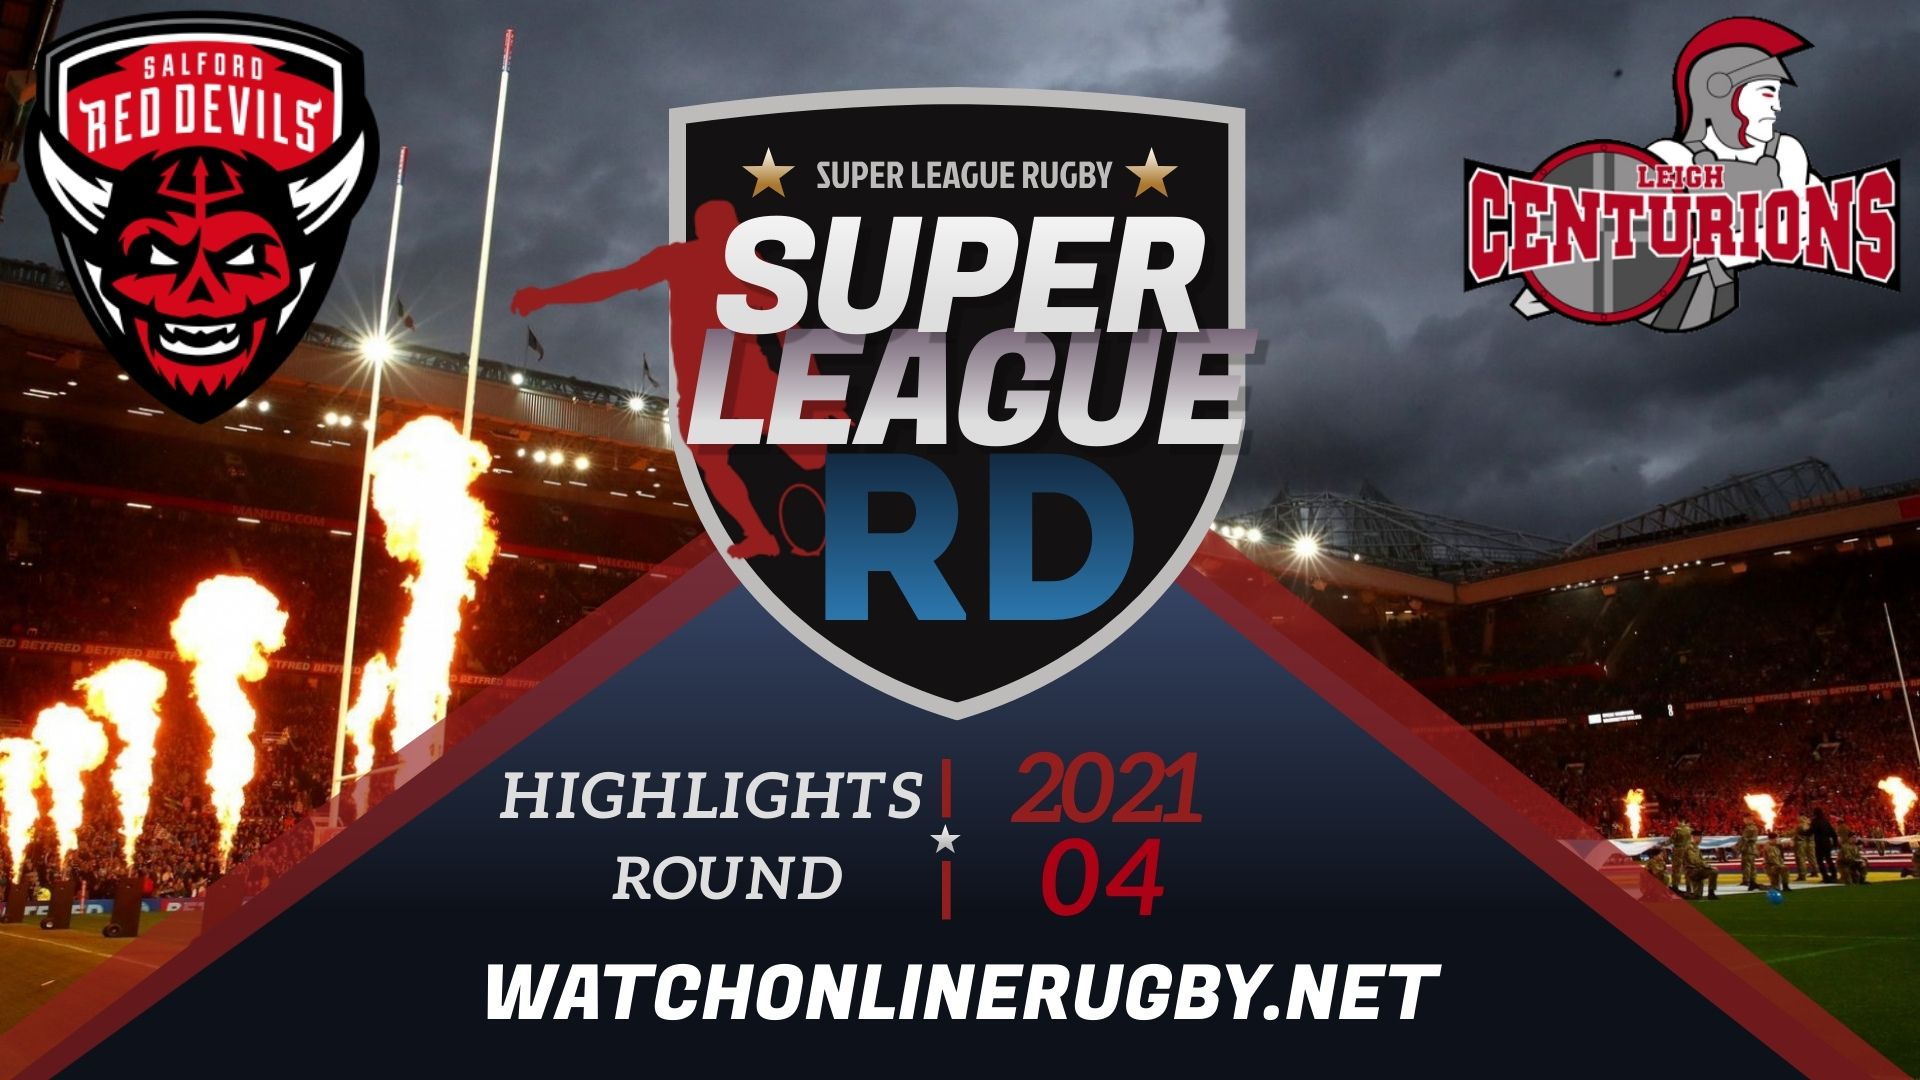 Salford Red Devils Vs Leigh Centurions Super League Rugby 2021 RD 4